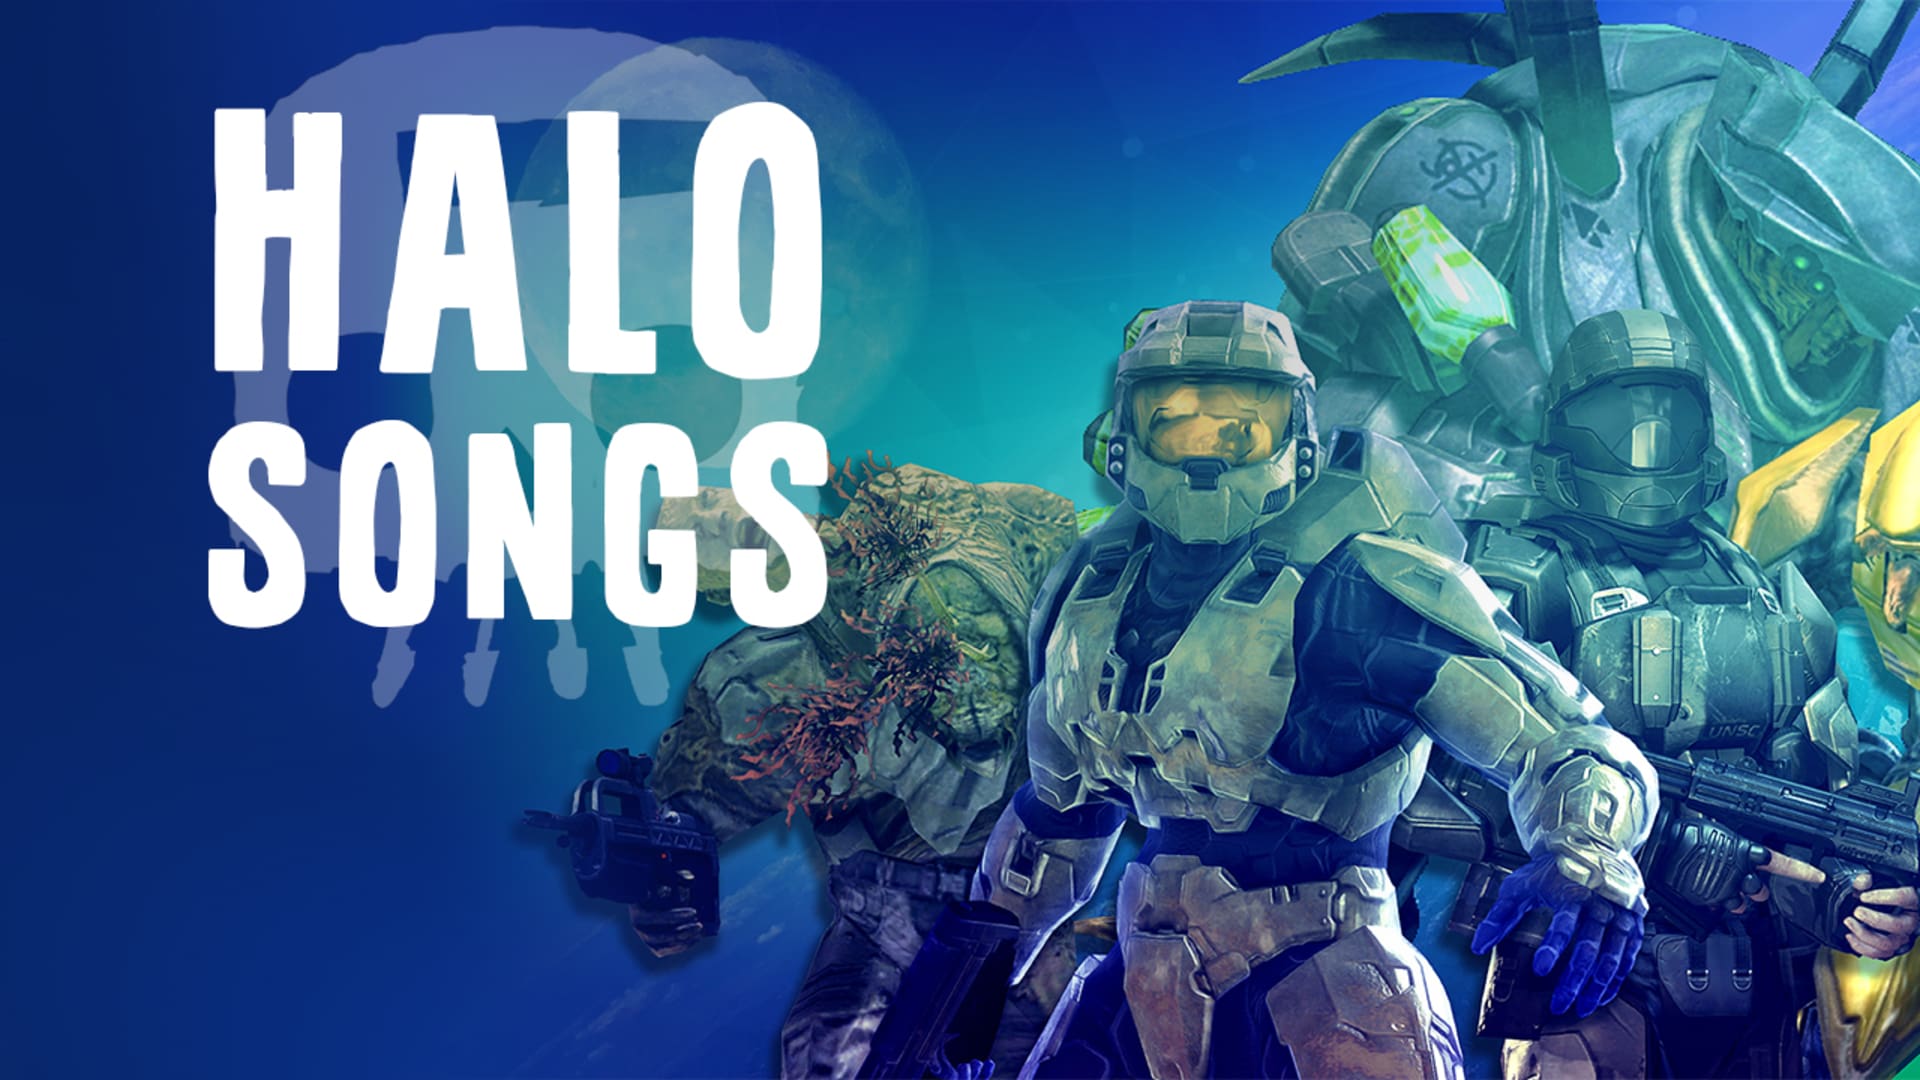 Series Halo Songs Rooster Teeth - halo reach noob song roblox id